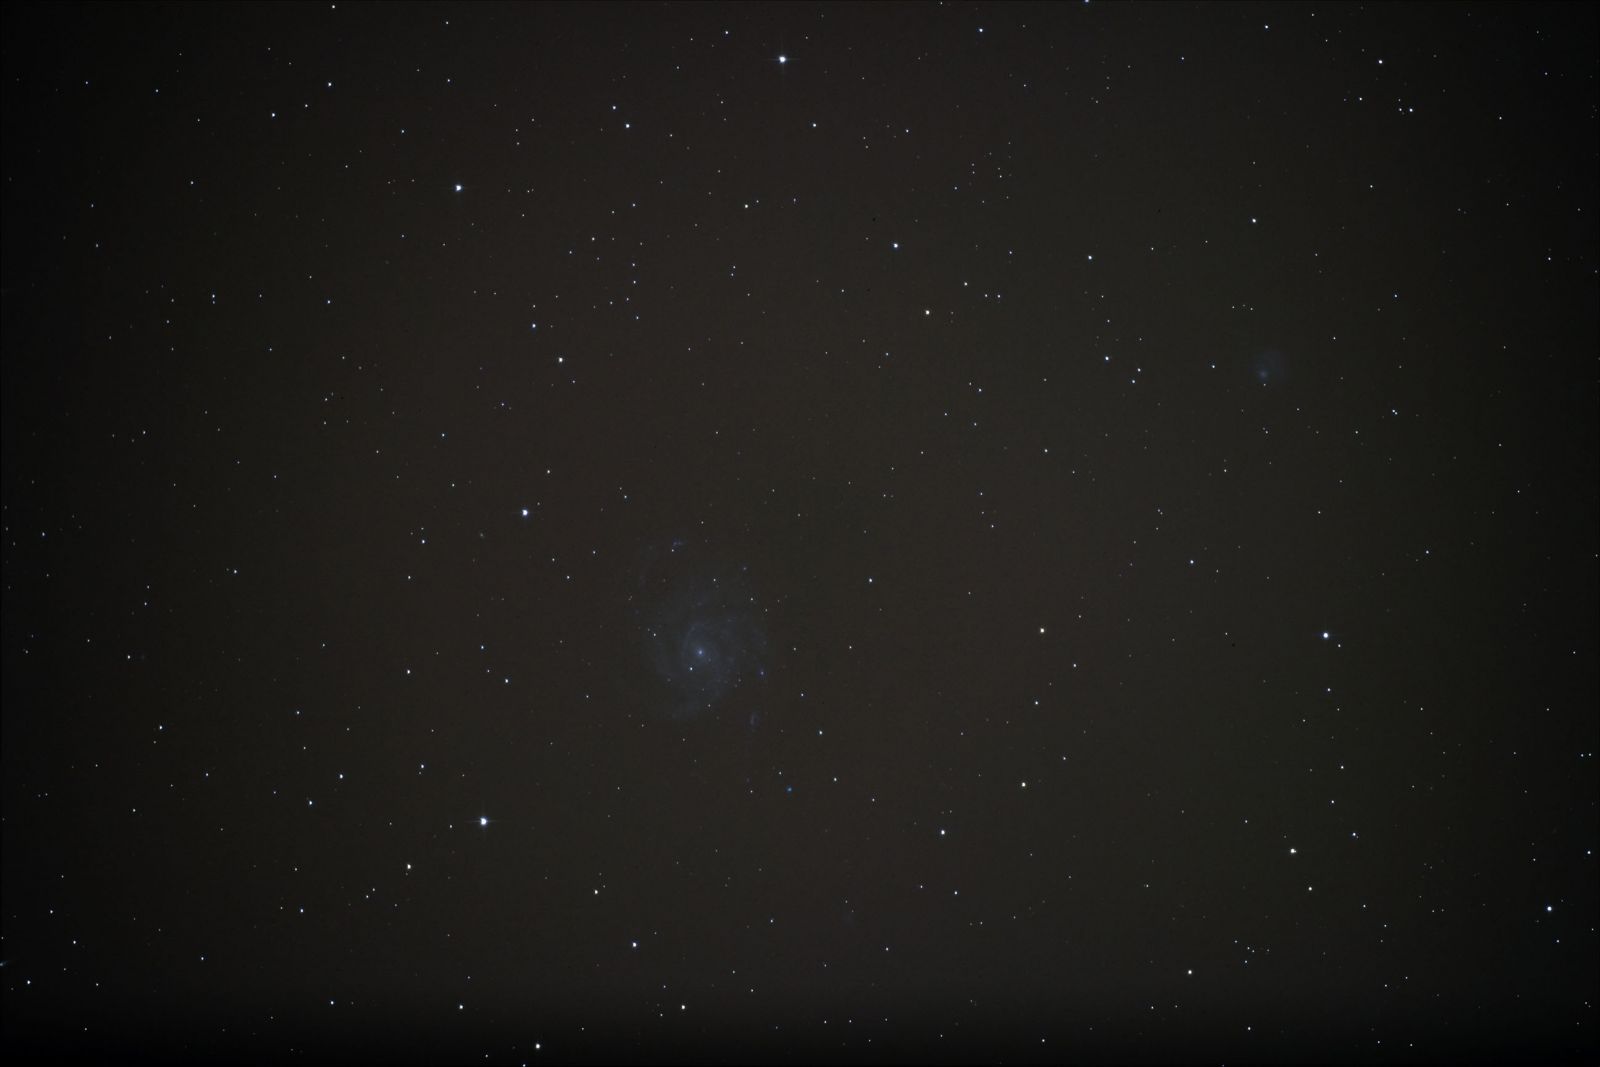 m101 - first stack